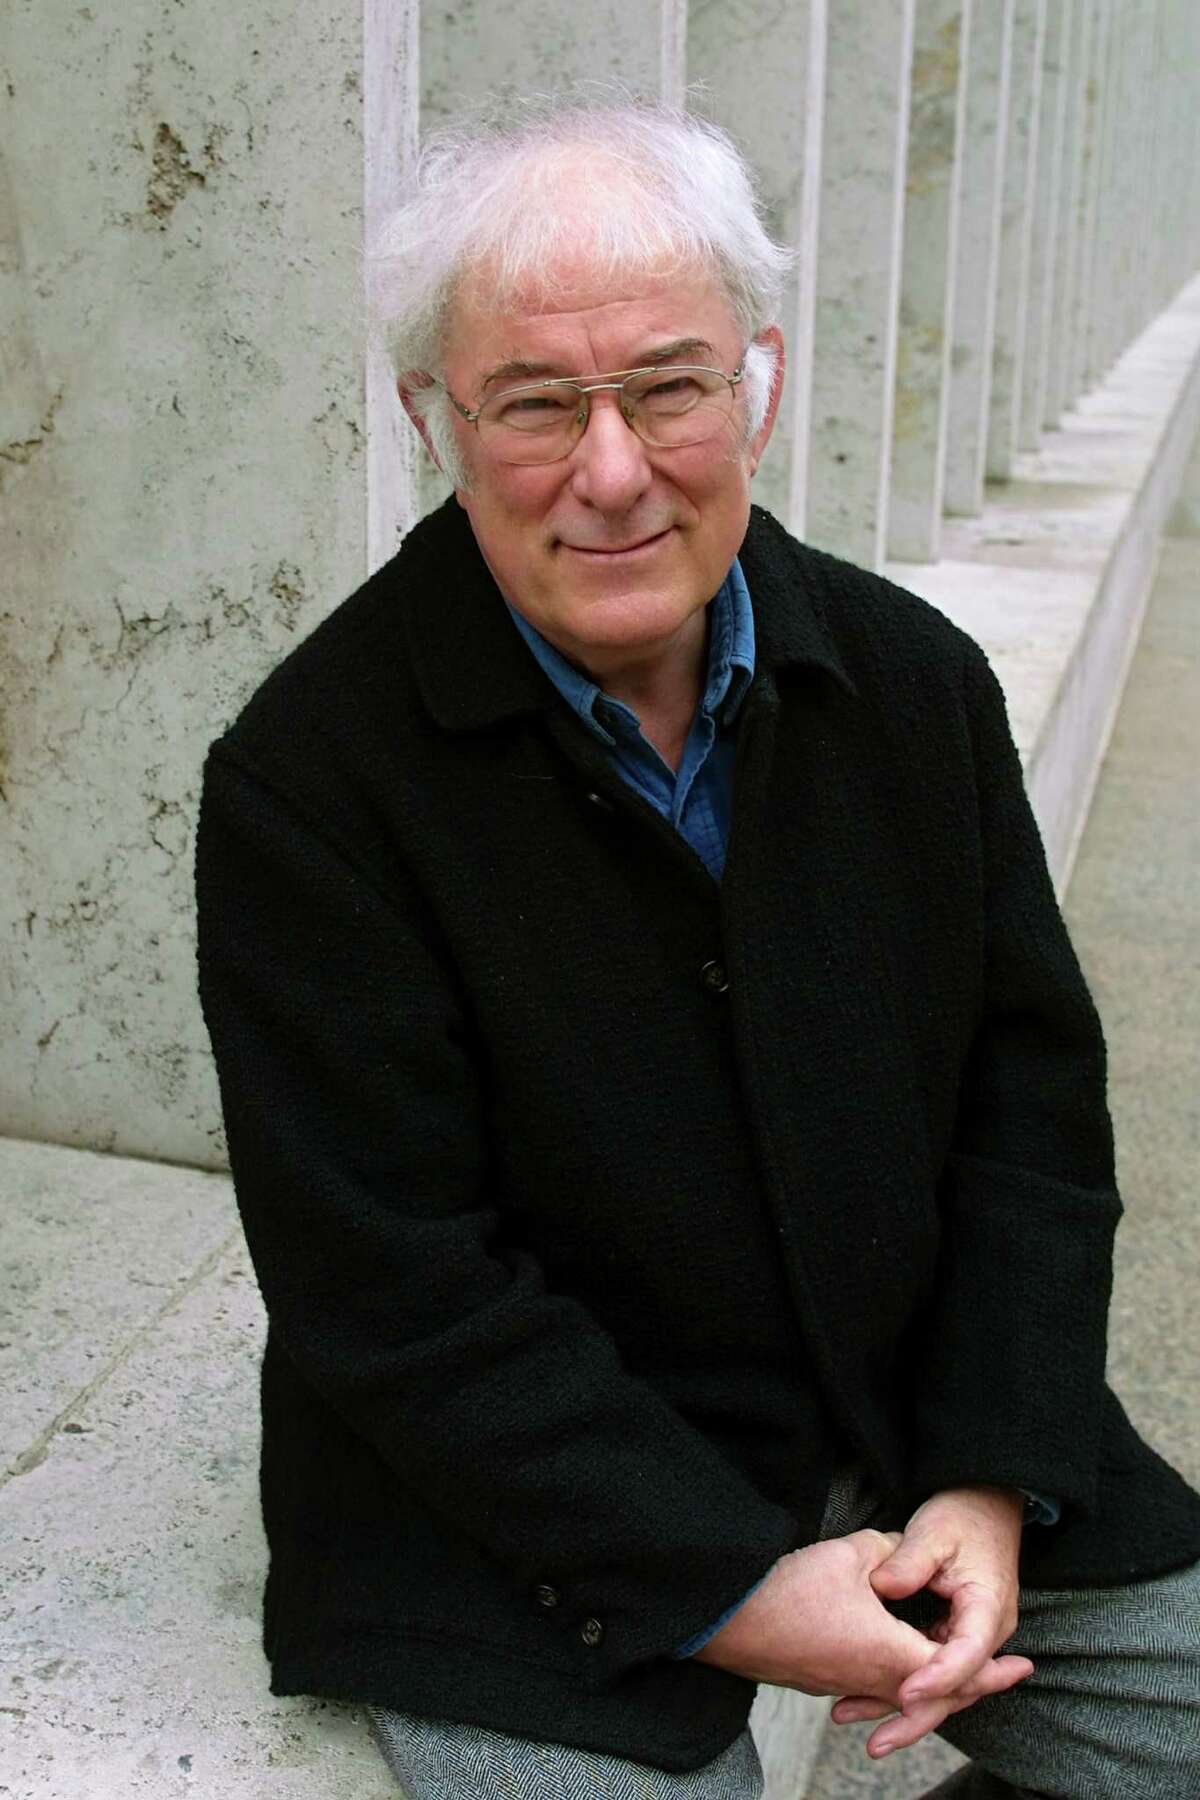 Poet Seamus Heaney, photographed in 2001, was the fourth Irishman to win the Nobel Prize in Literature.